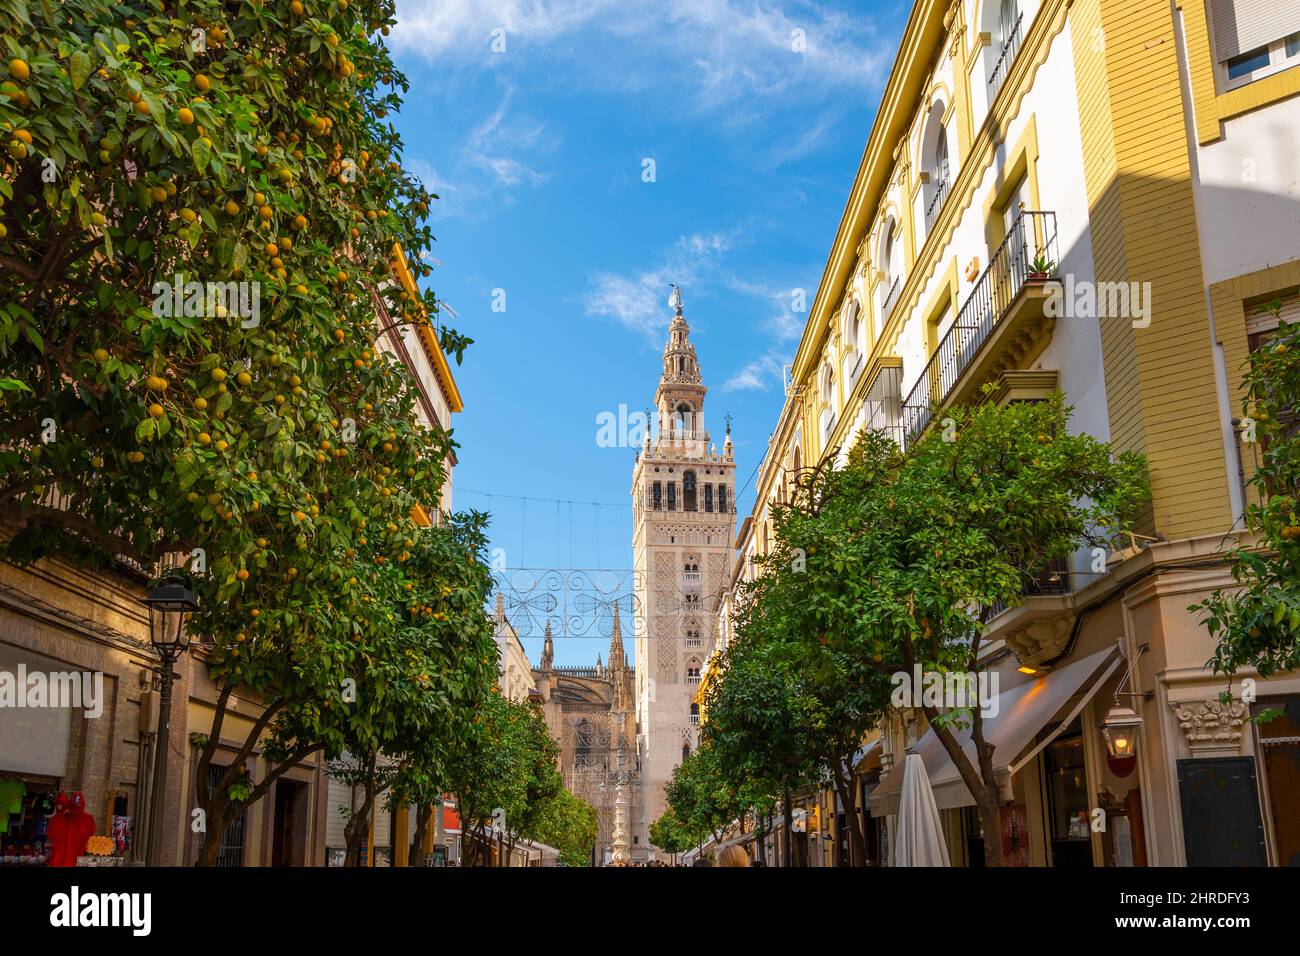 A typical orange tree lined street in the Barrio Santa Cruz district of Seville, Spain, with the cathedral and Giralda Tower in the distance. Stock Photo